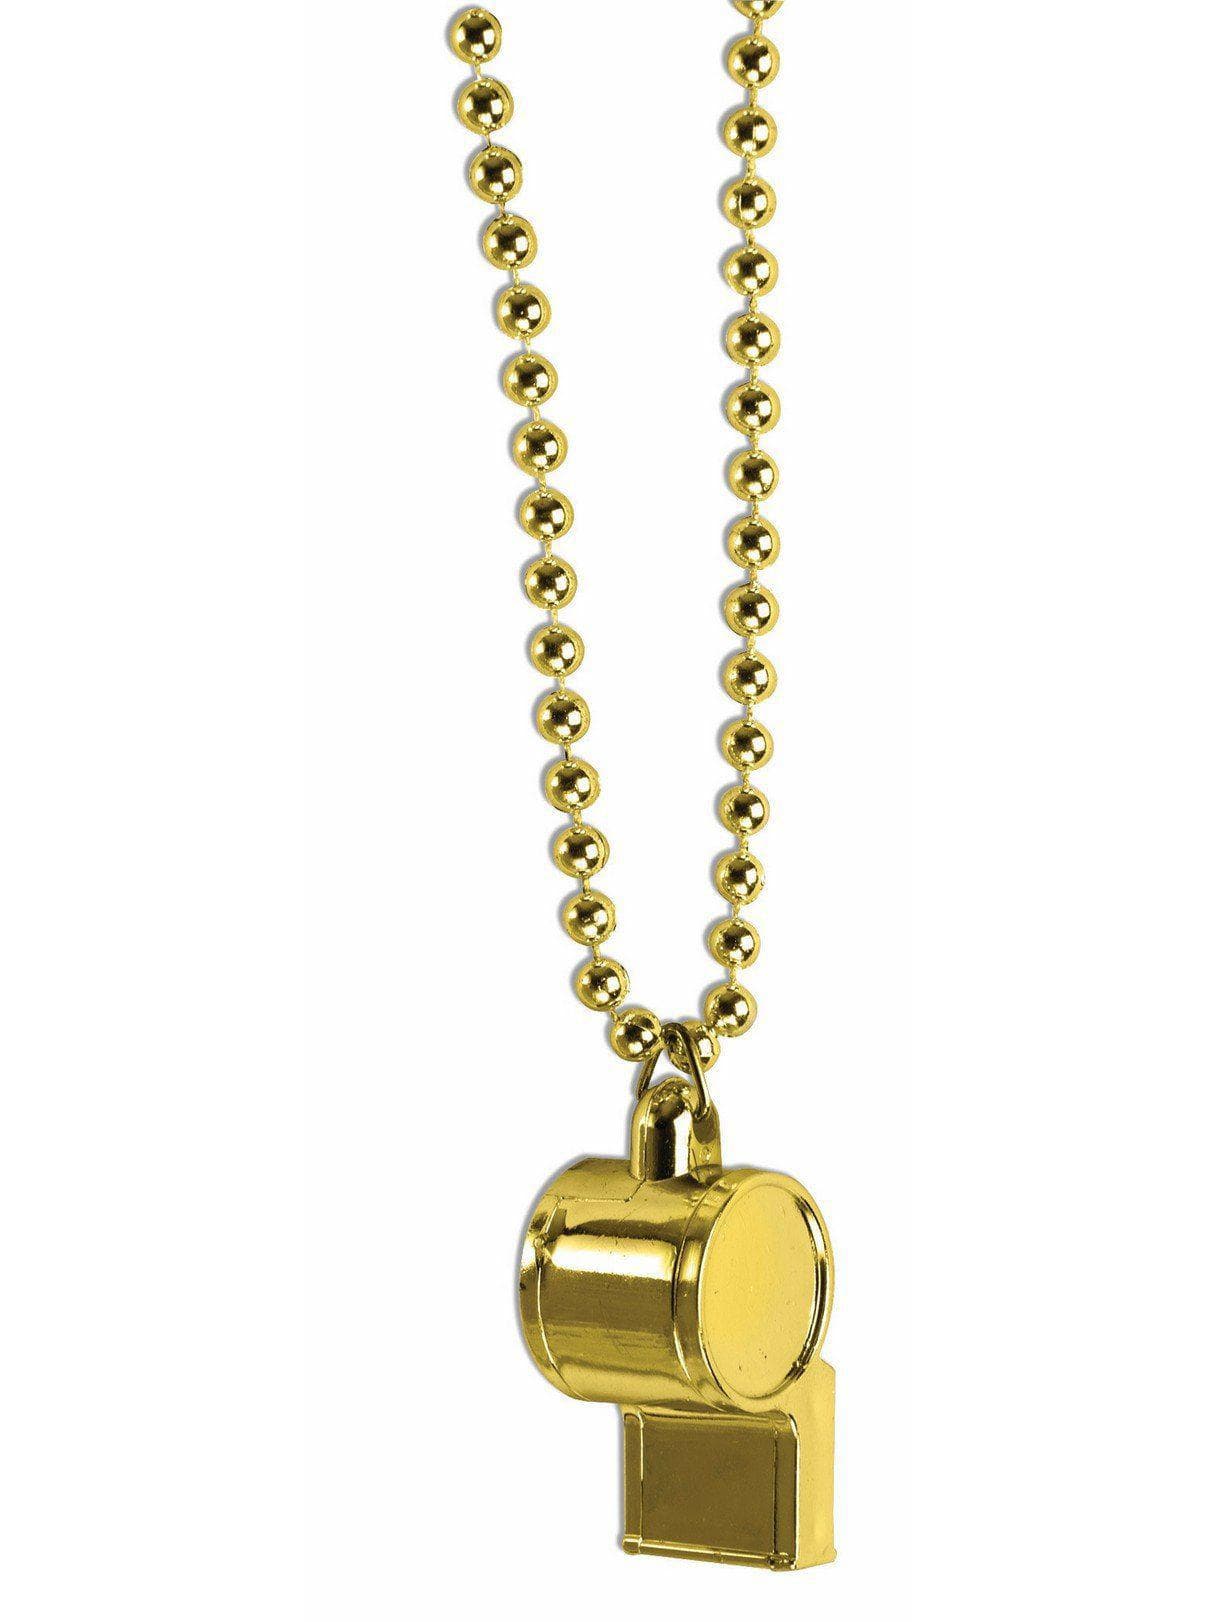 Adult Gold Bead Necklace with Whistle - costumes.com